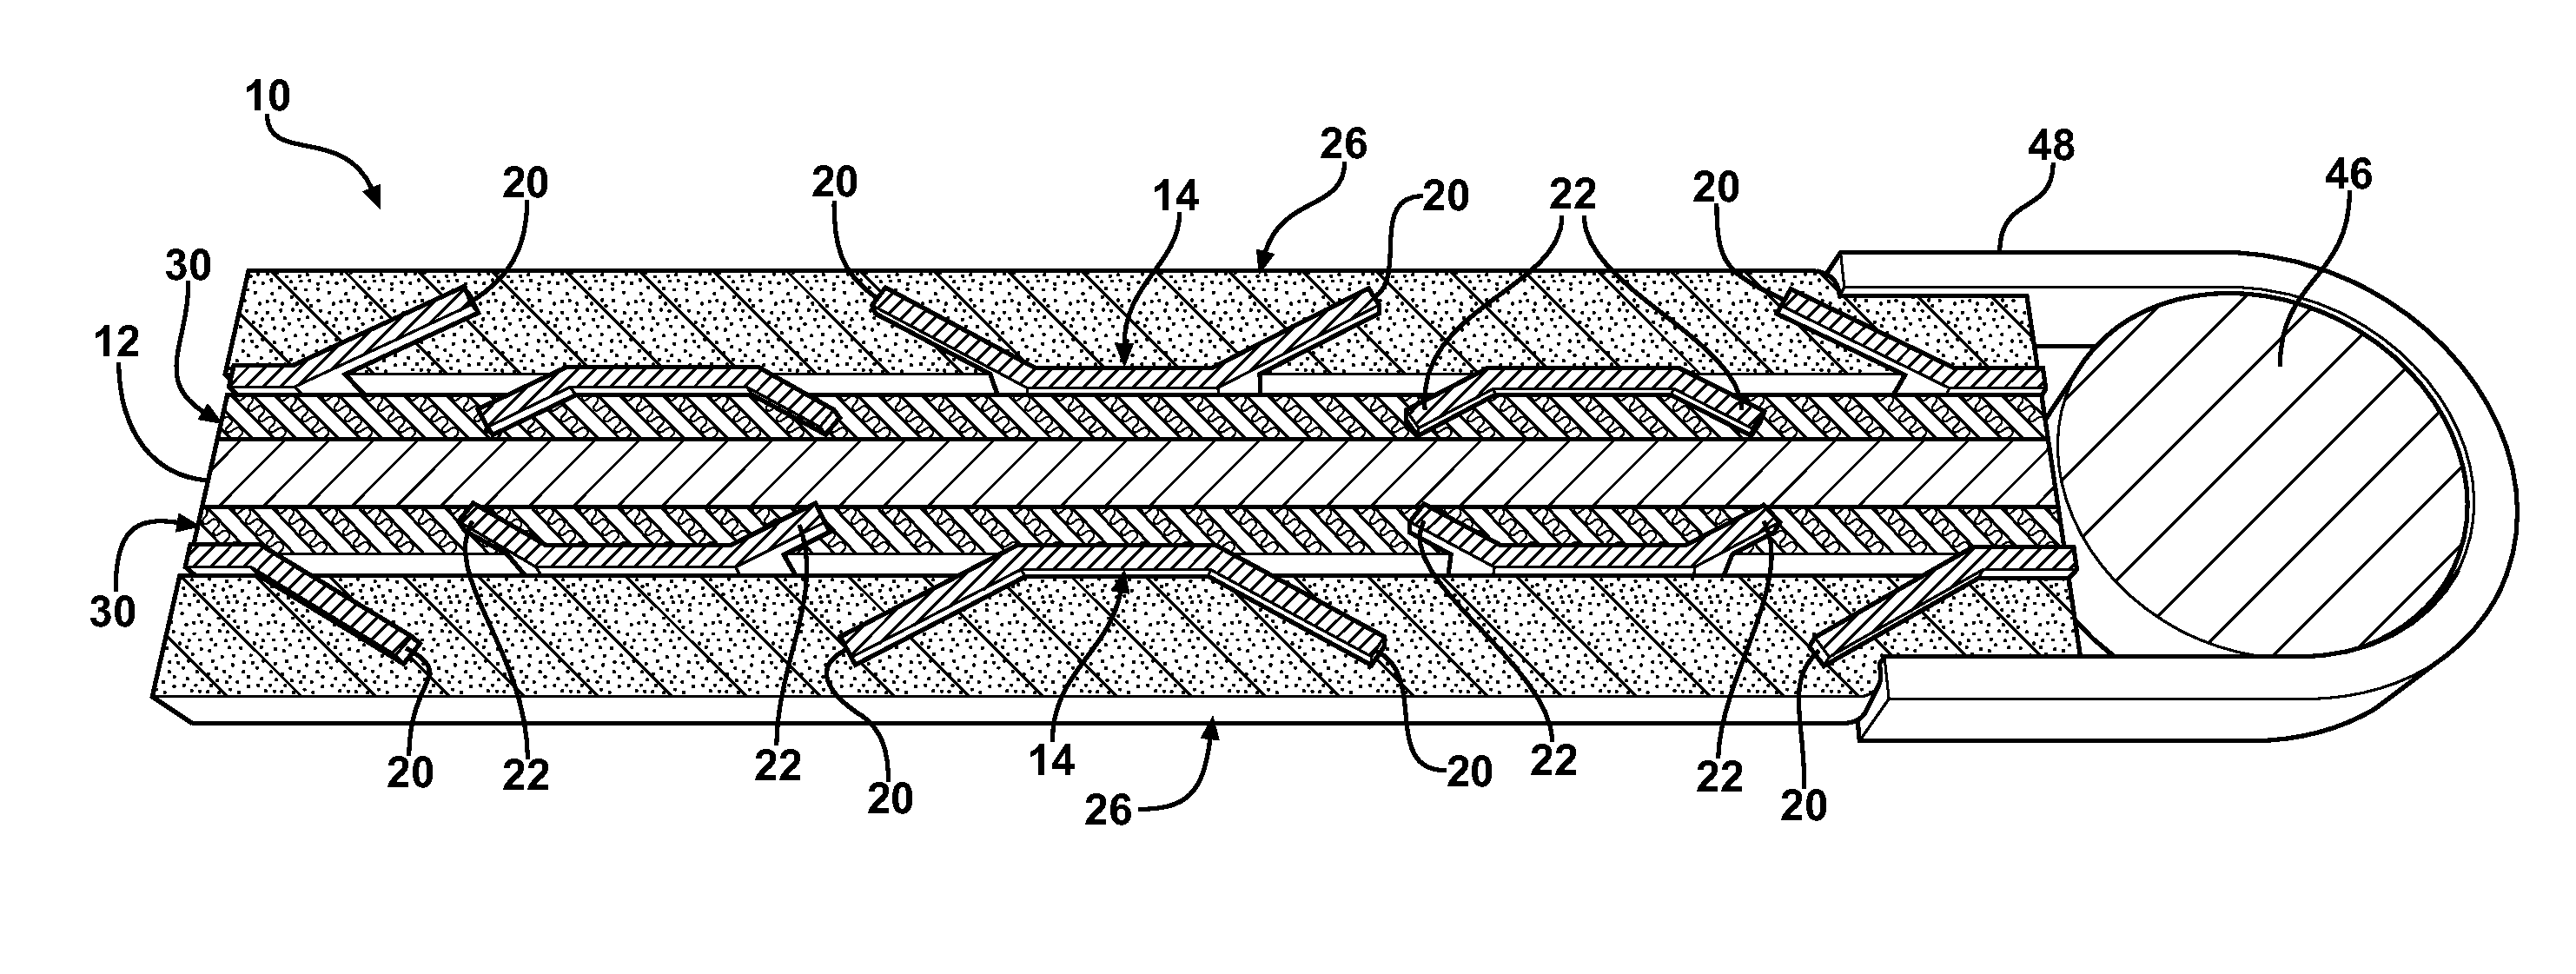 Multi-layered composite gasket